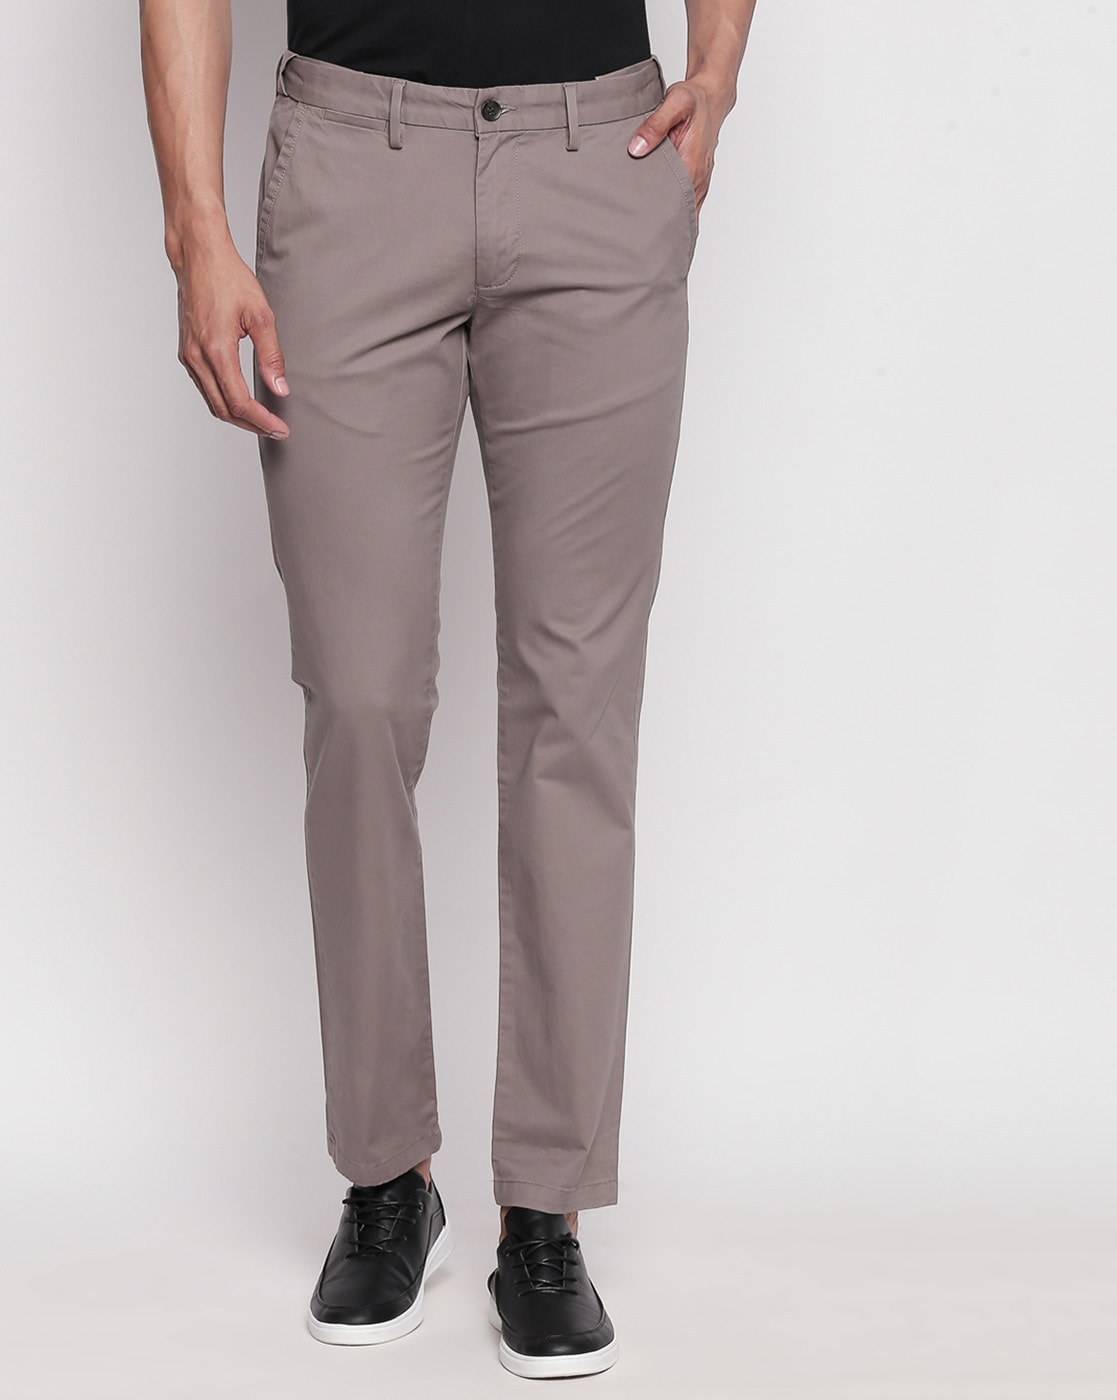 Buy Beige Trousers & Pants for Men by BYFORD by Pantaloons Online | Ajio.com